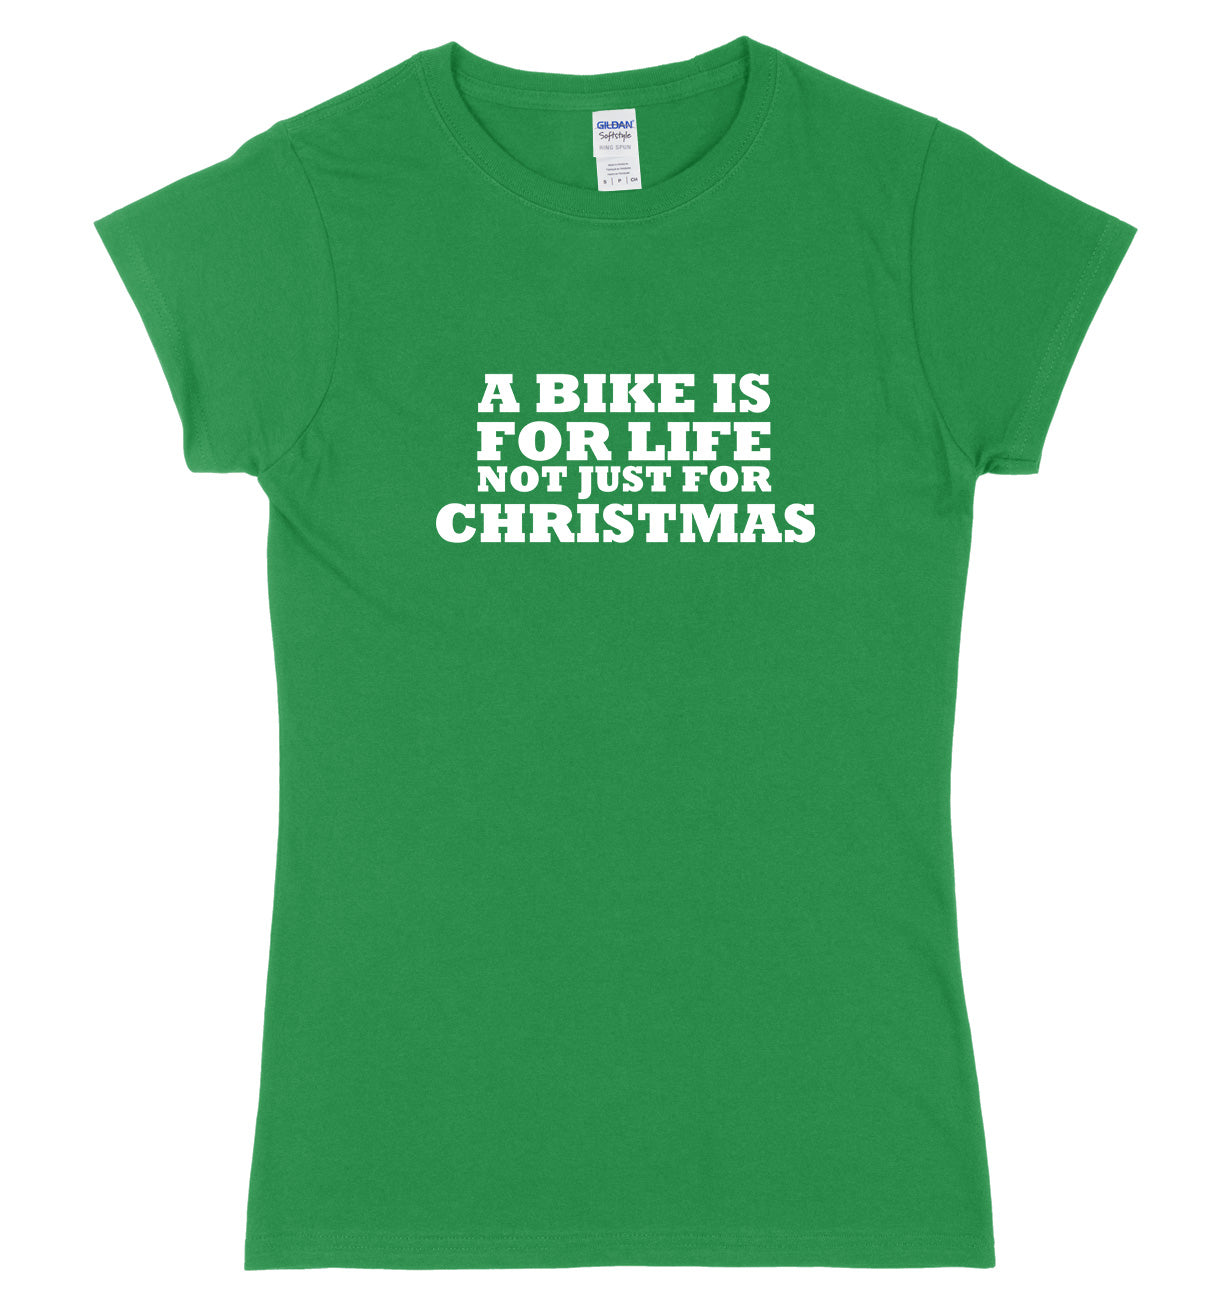 A Bike Is For Life Not Just For Christmas Womens Ladies Slim Fit Christmas T-Shirt